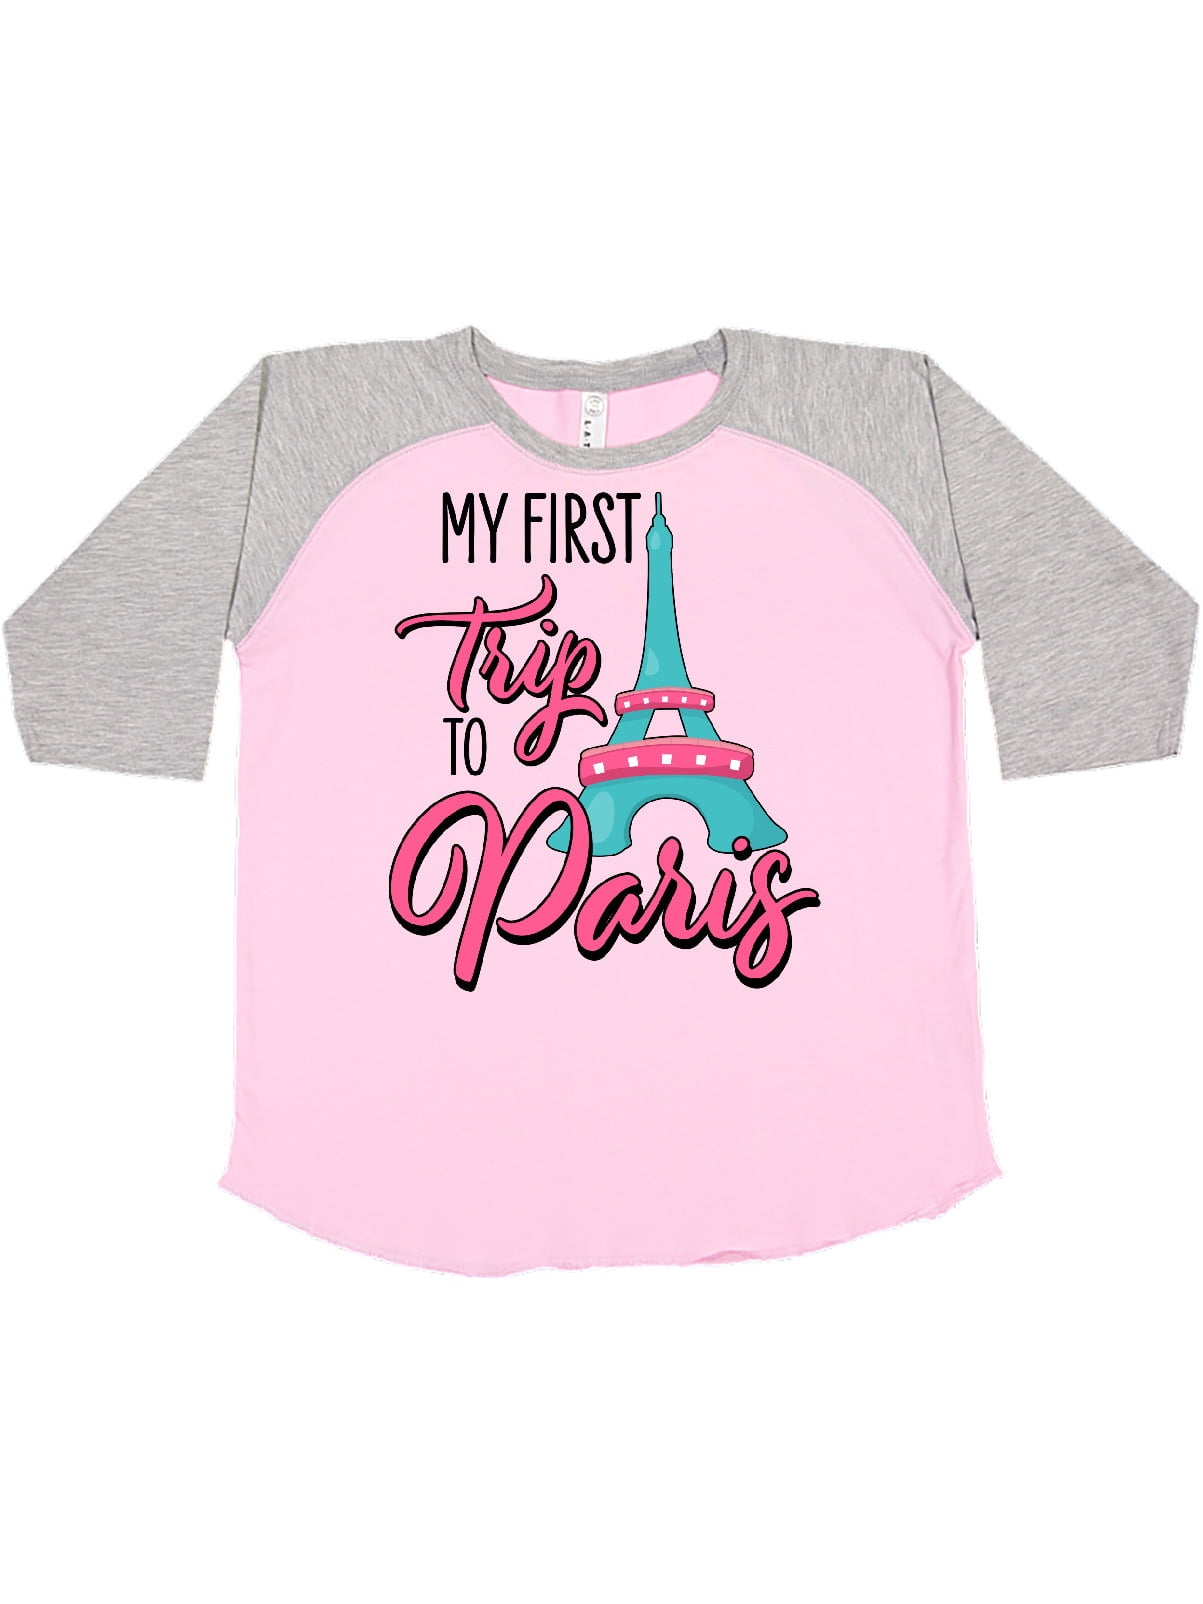 My First Trip to Des Moines Toddler/Kids Short Sleeve T-Shirt 